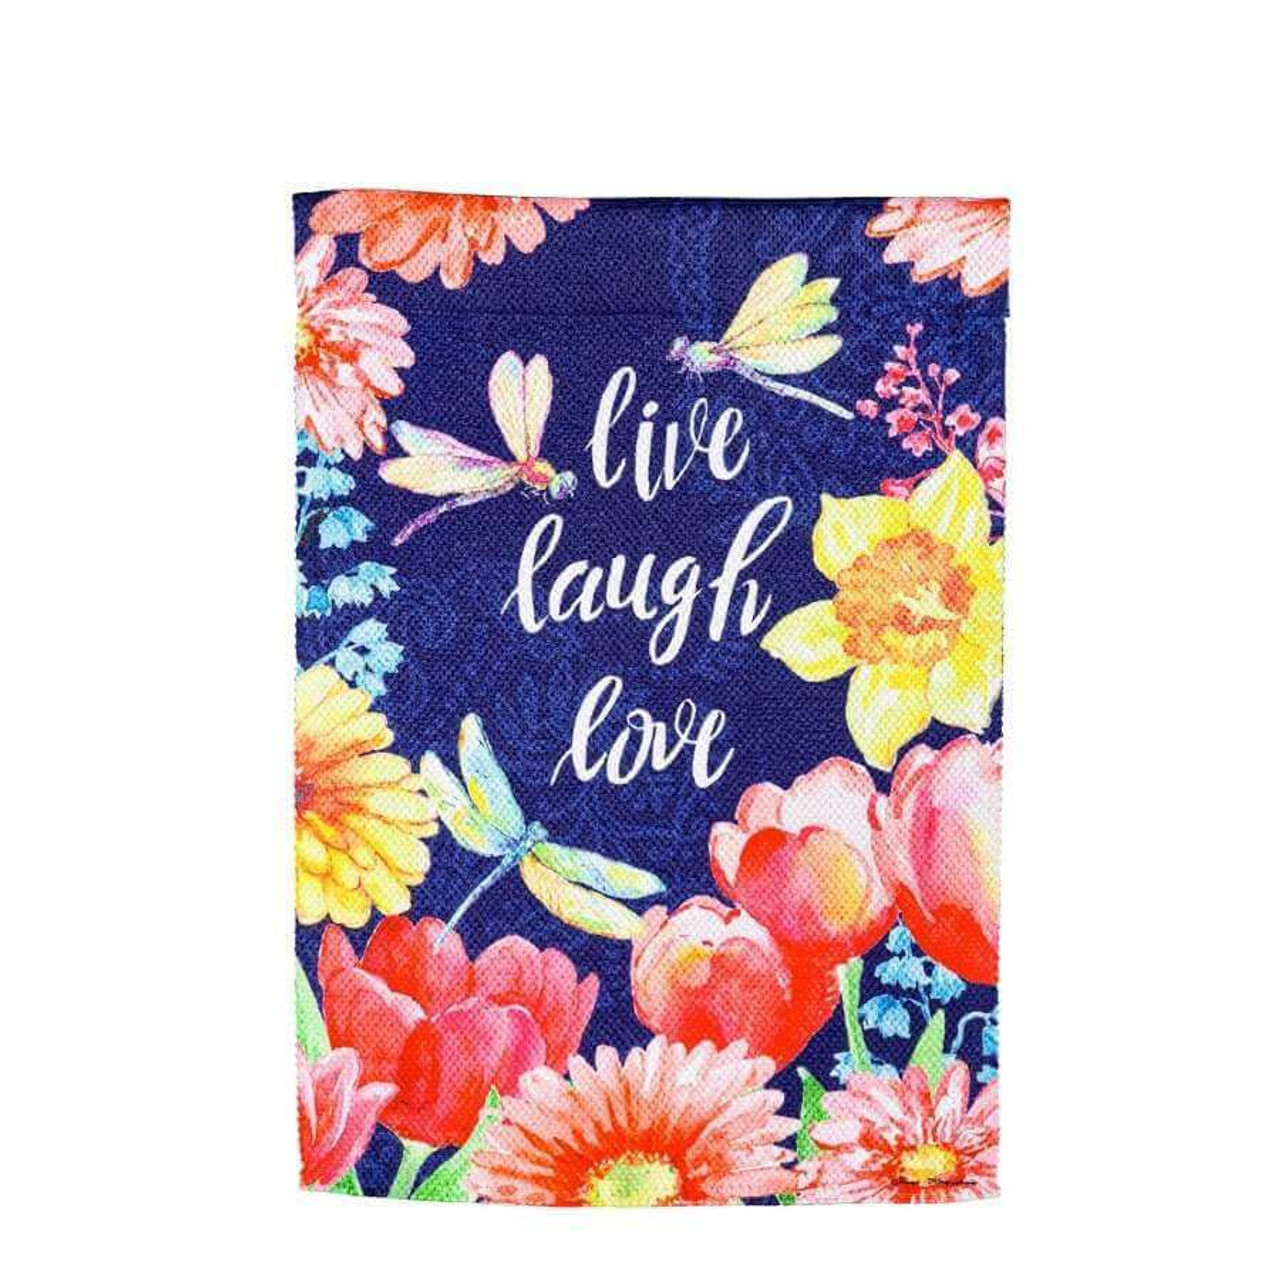 This flag features a collection of watercolor flowers in pink, red, and yellow, accompanied by 3 dragonflies. The background is navy blue and the white text in the middle reads "live laugh love" in cursive.